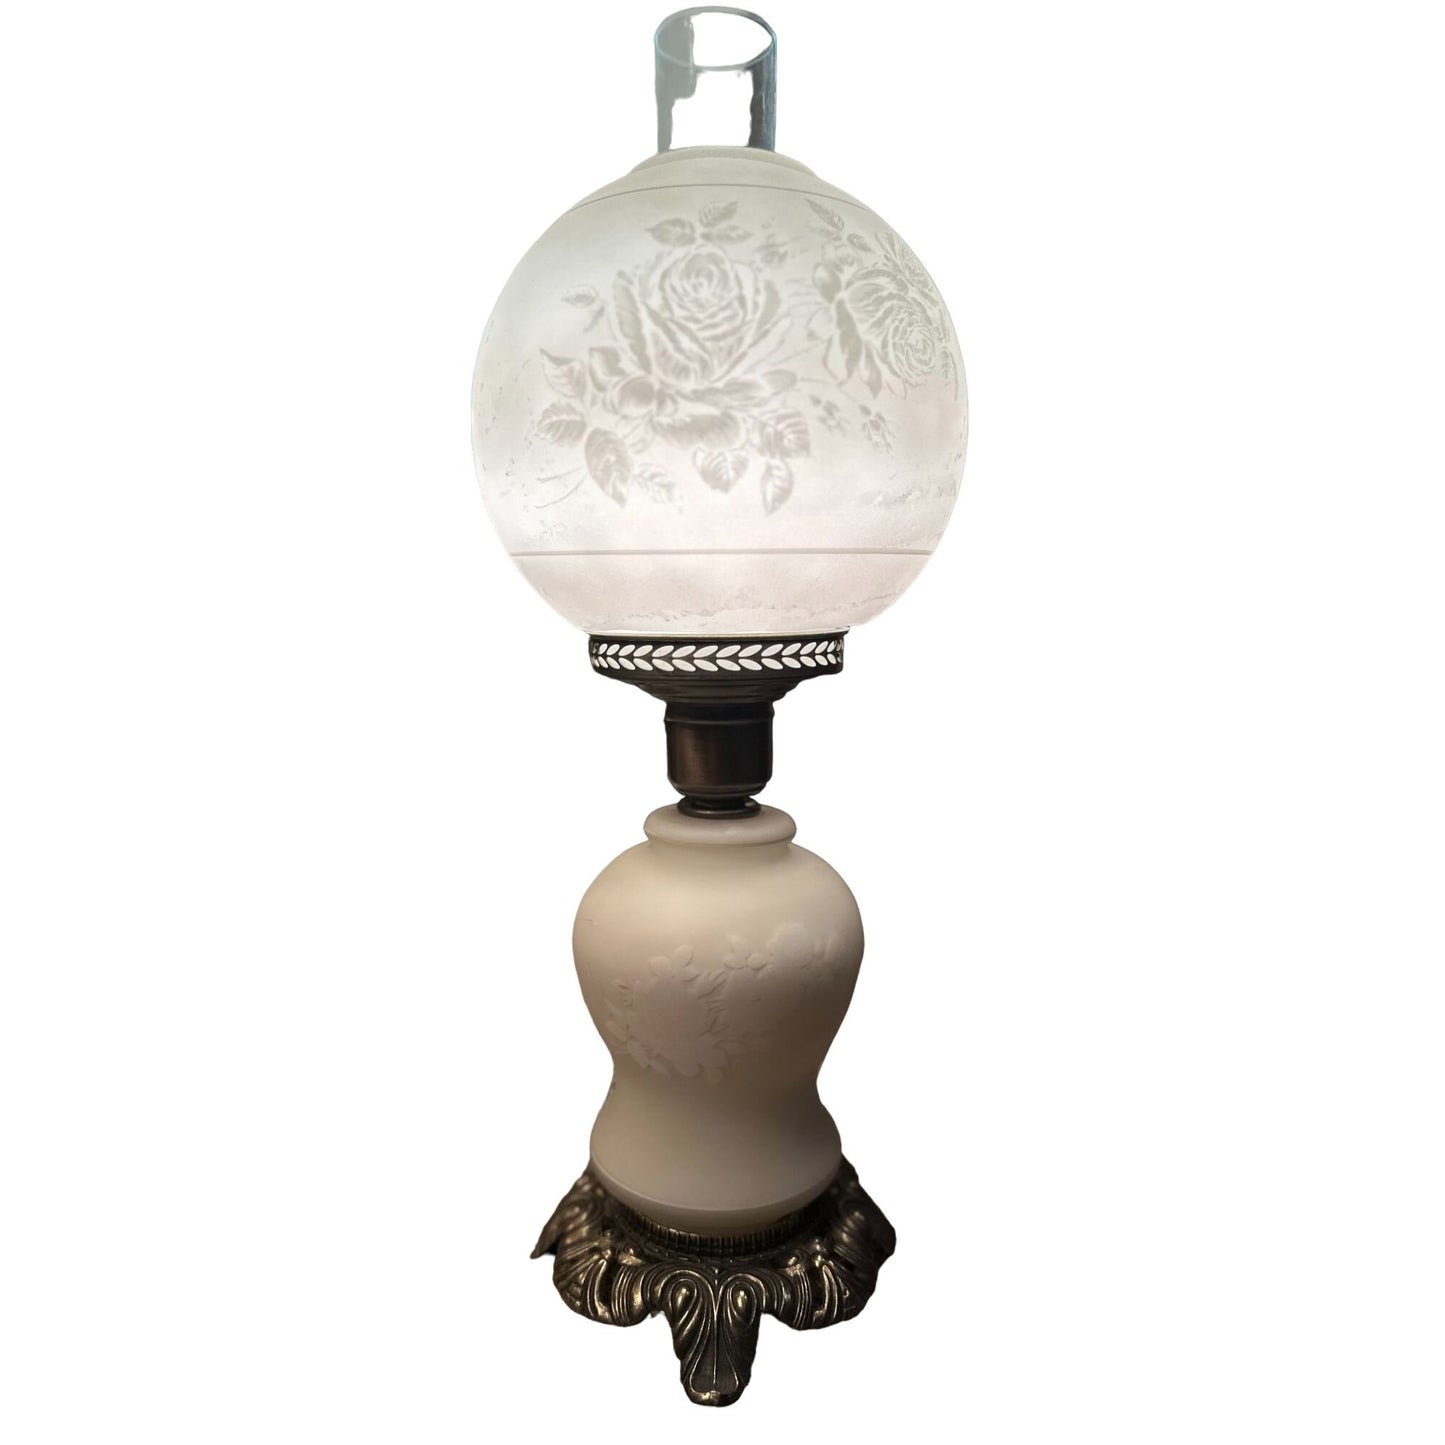 Vintage Double Globe Milk Glass Gone with the Wind Footed Table Lamp Light